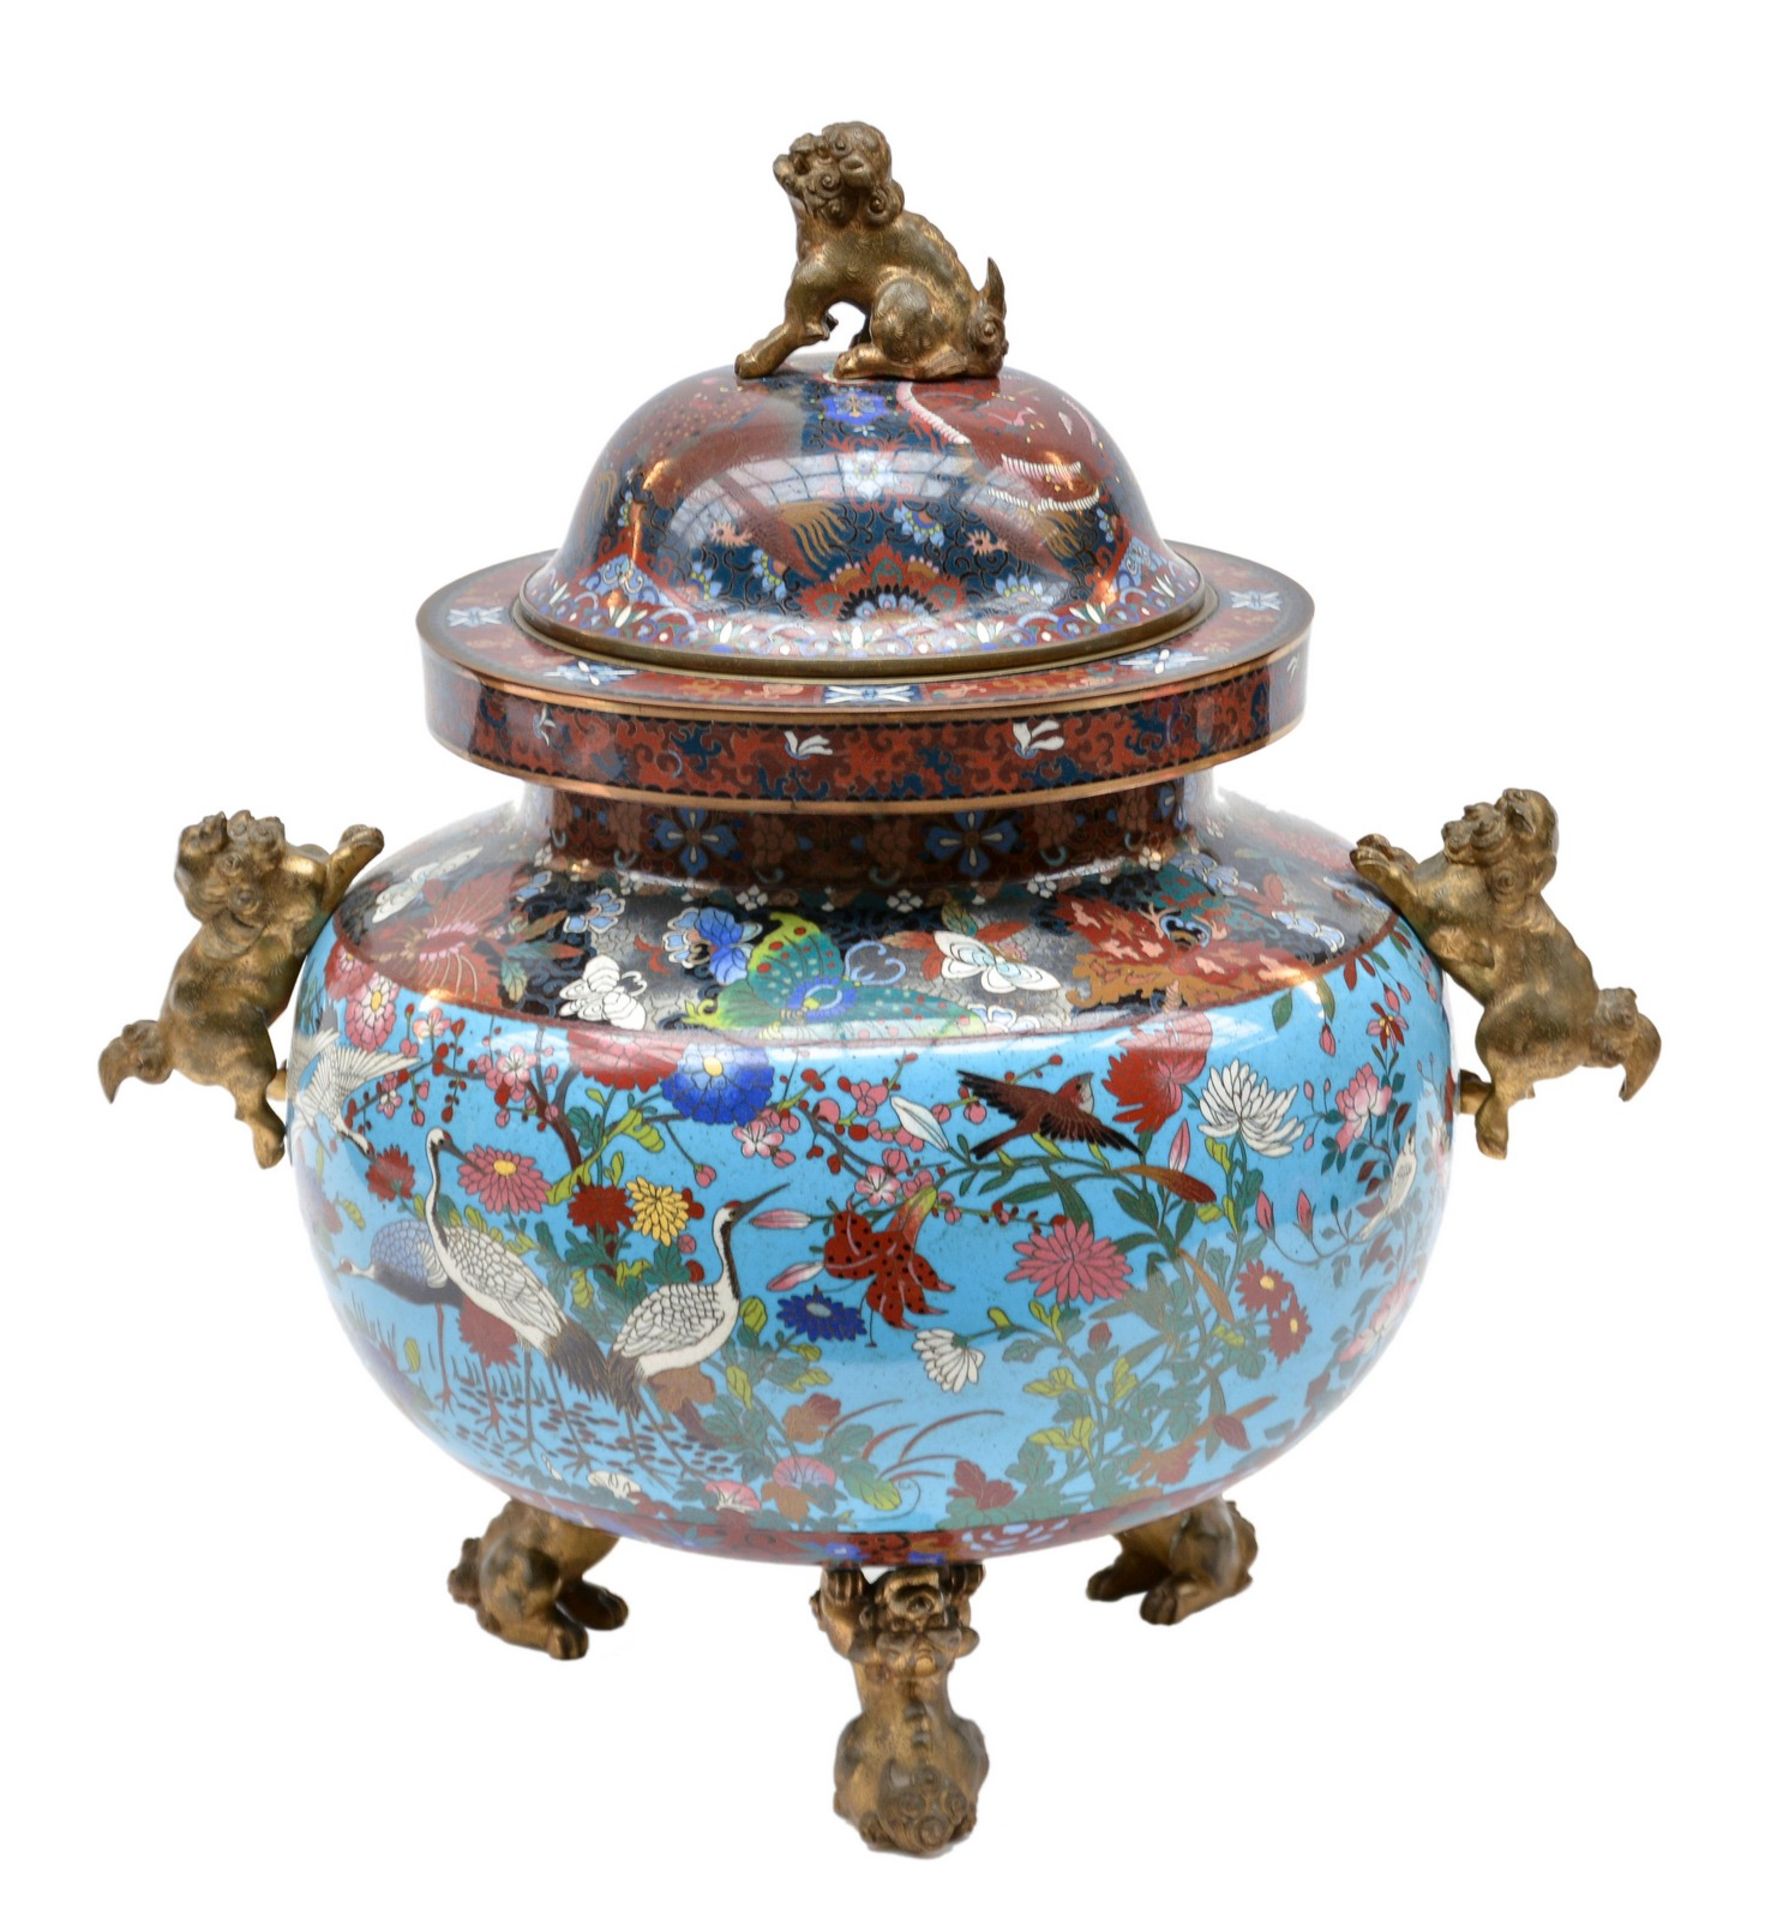 A Chinese cloisonné vase and cover, decorated with animals and floral motifs, the gilt bronze